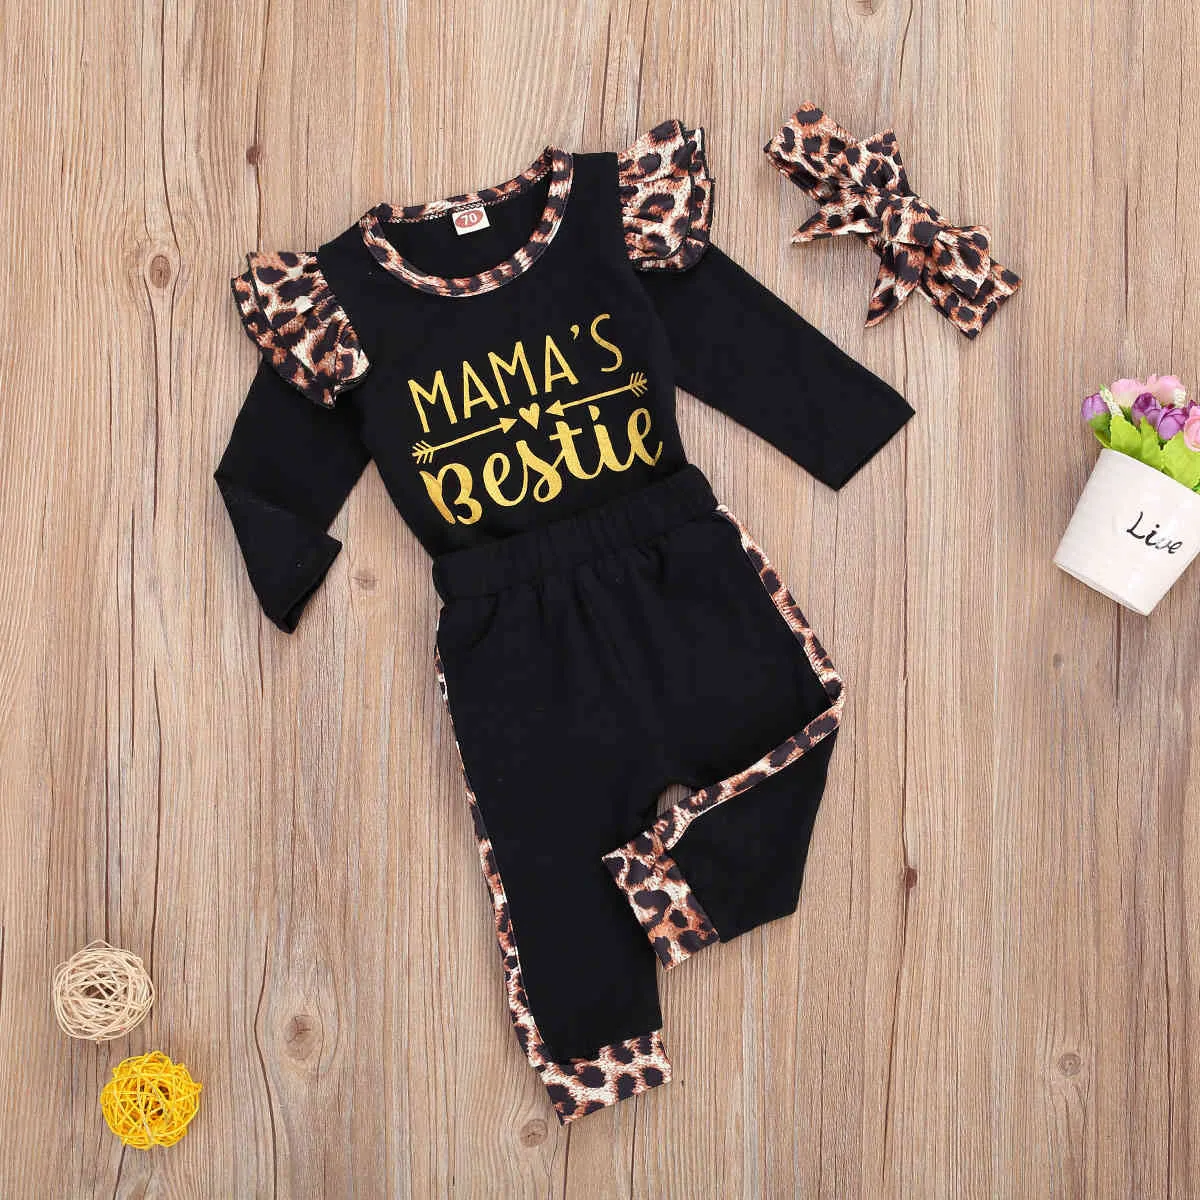 0-24M born Infant Baby Girl Leopard Clothes Set Letter Ruffles Romper Pants Headband Outfits 210515